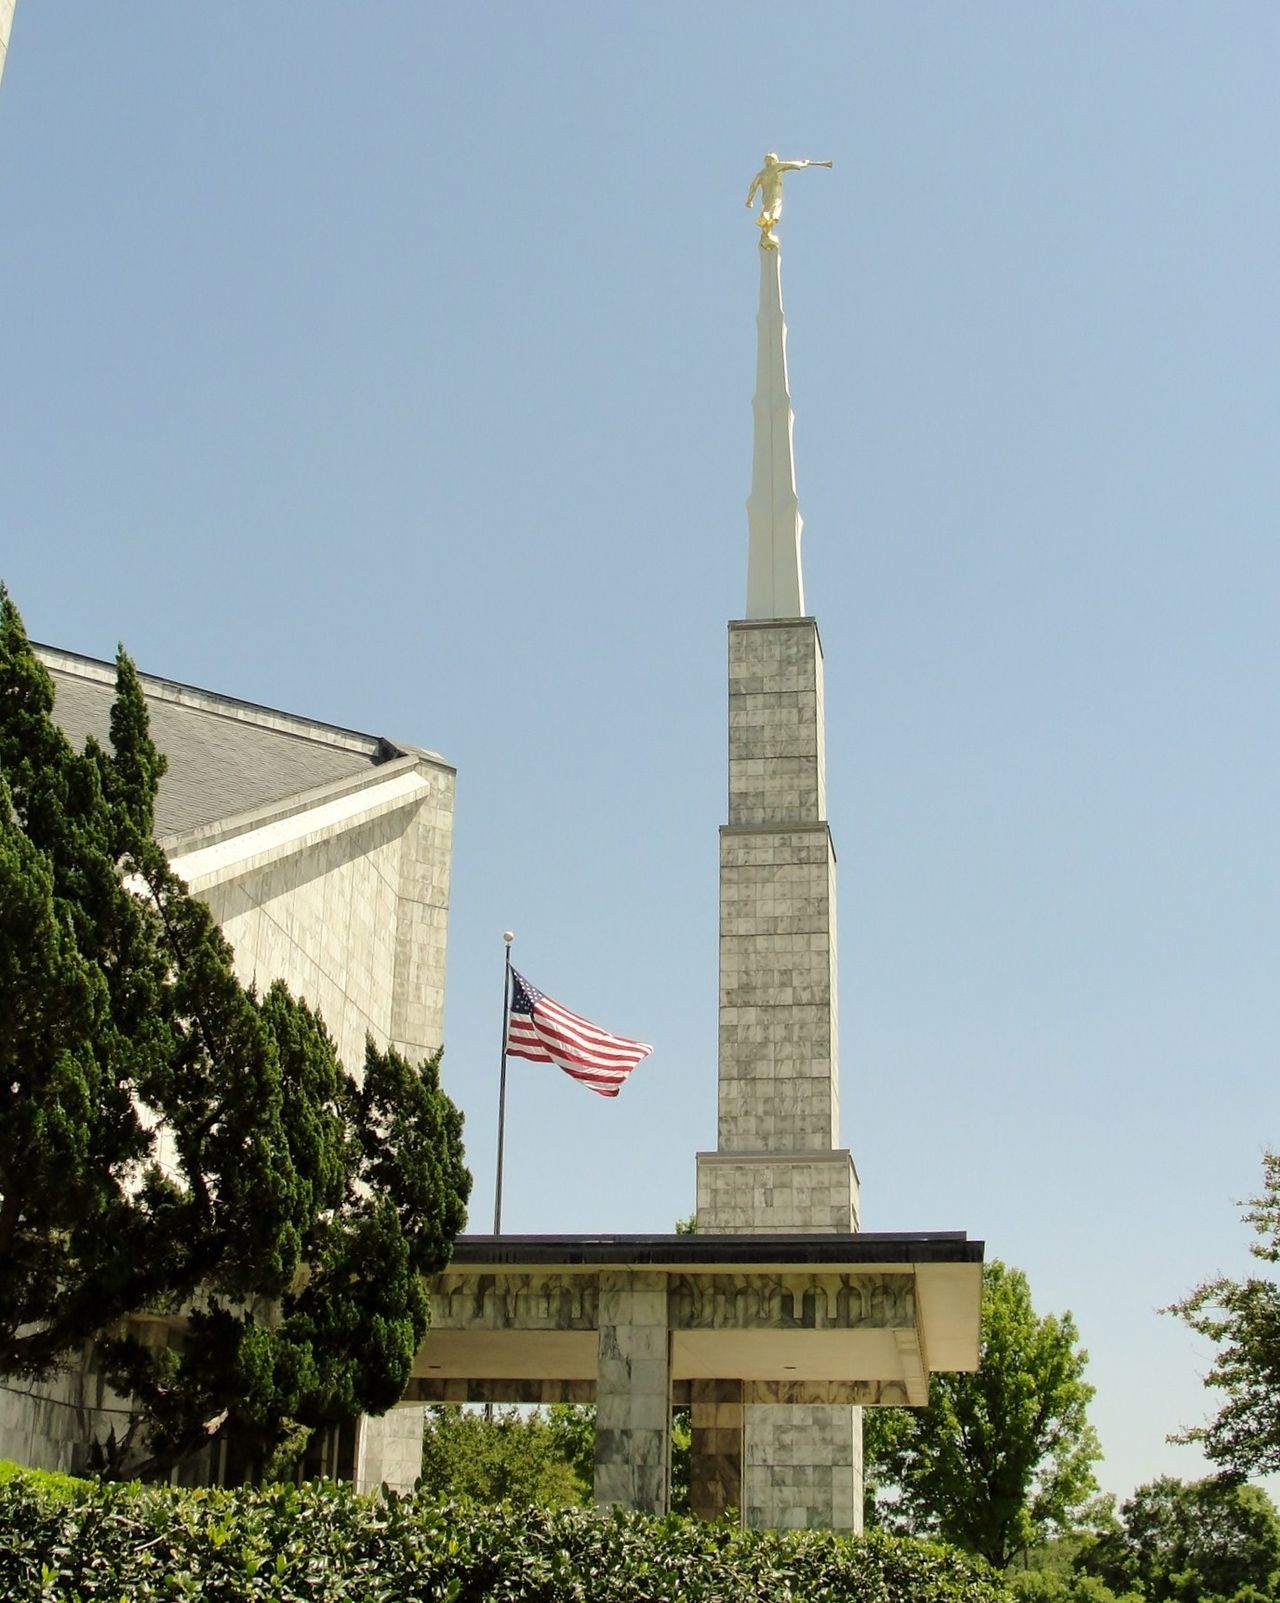 The Dallas Texas Temple has one spire with the angel Moroni on top.